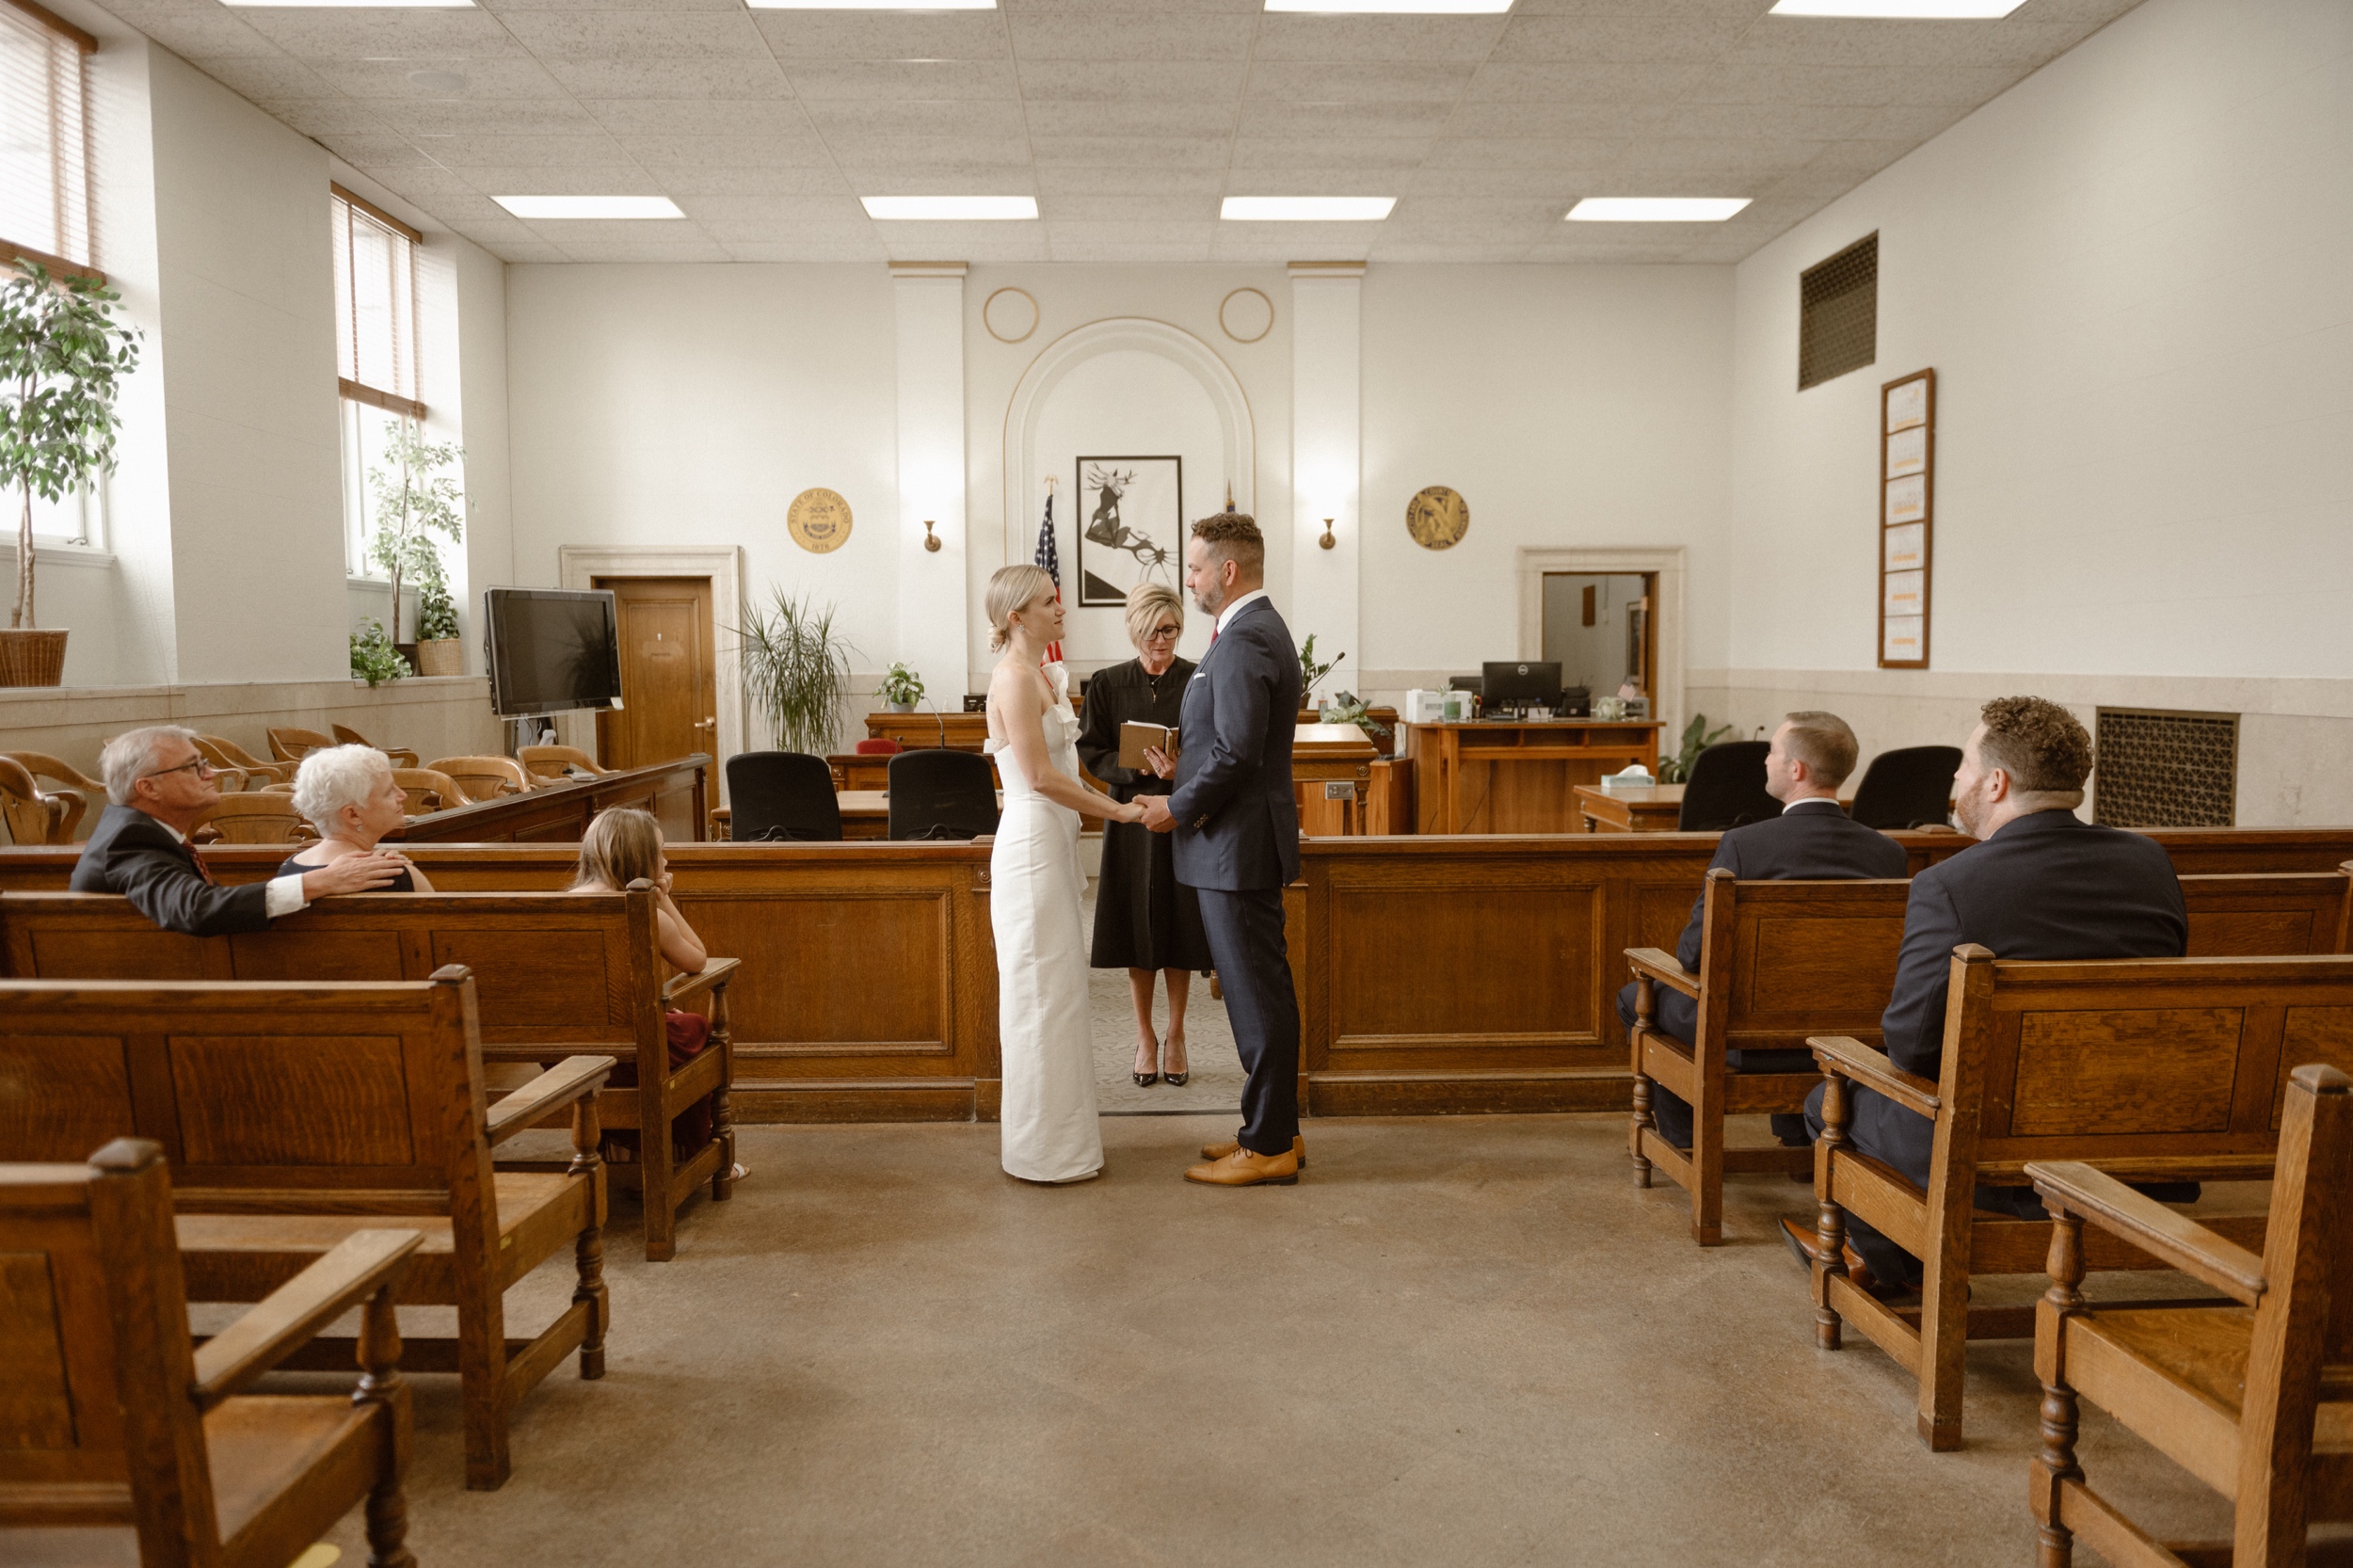 A photo of a bride and groom during their courthouse ceremony in Denver. Photo by Colorado wedding photographer Ashley Joyce.